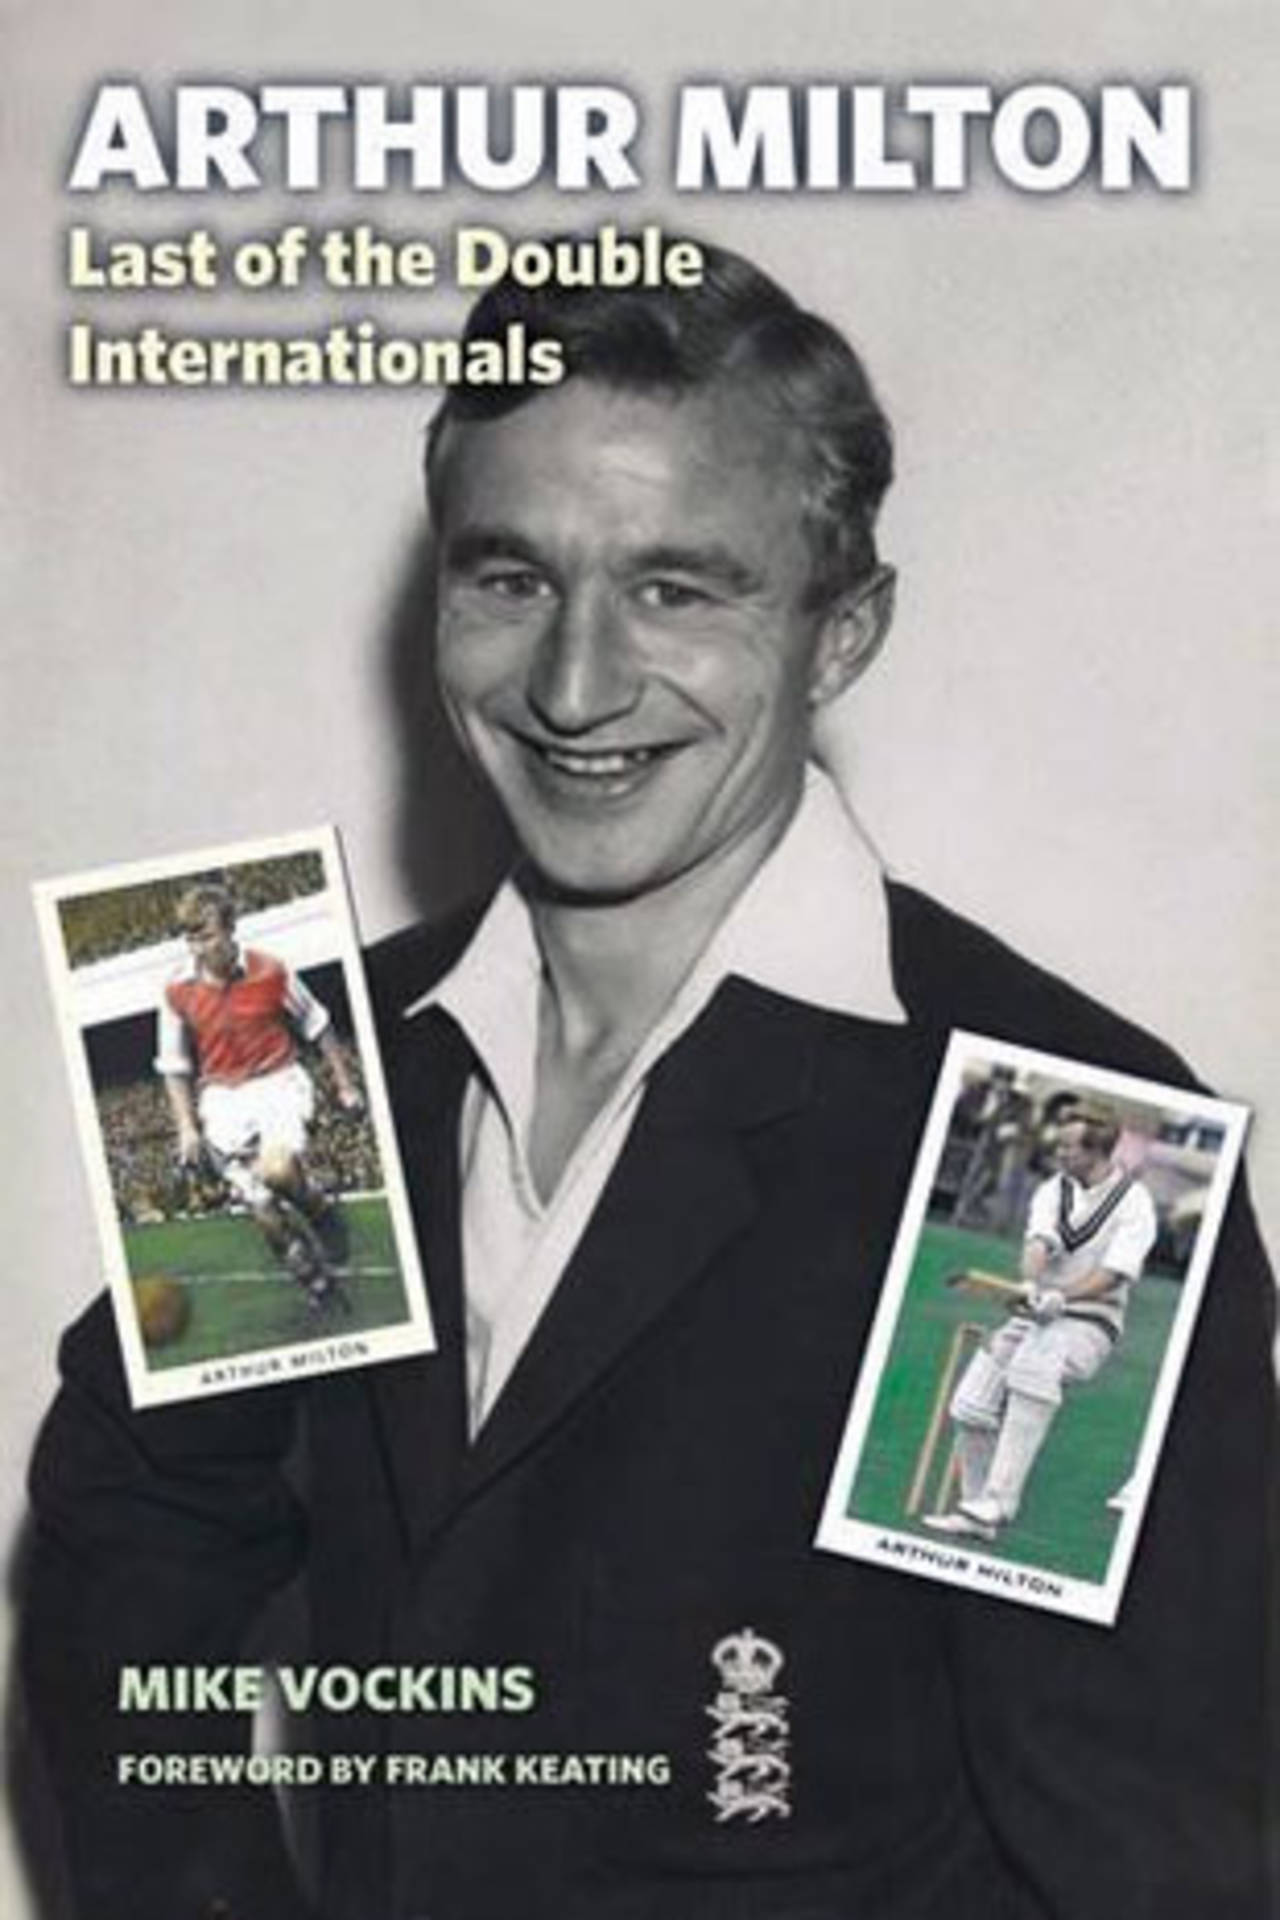 The cover image of <i>Arthur Milton: The Last of the Double Internationals</i> by Mike Vockins